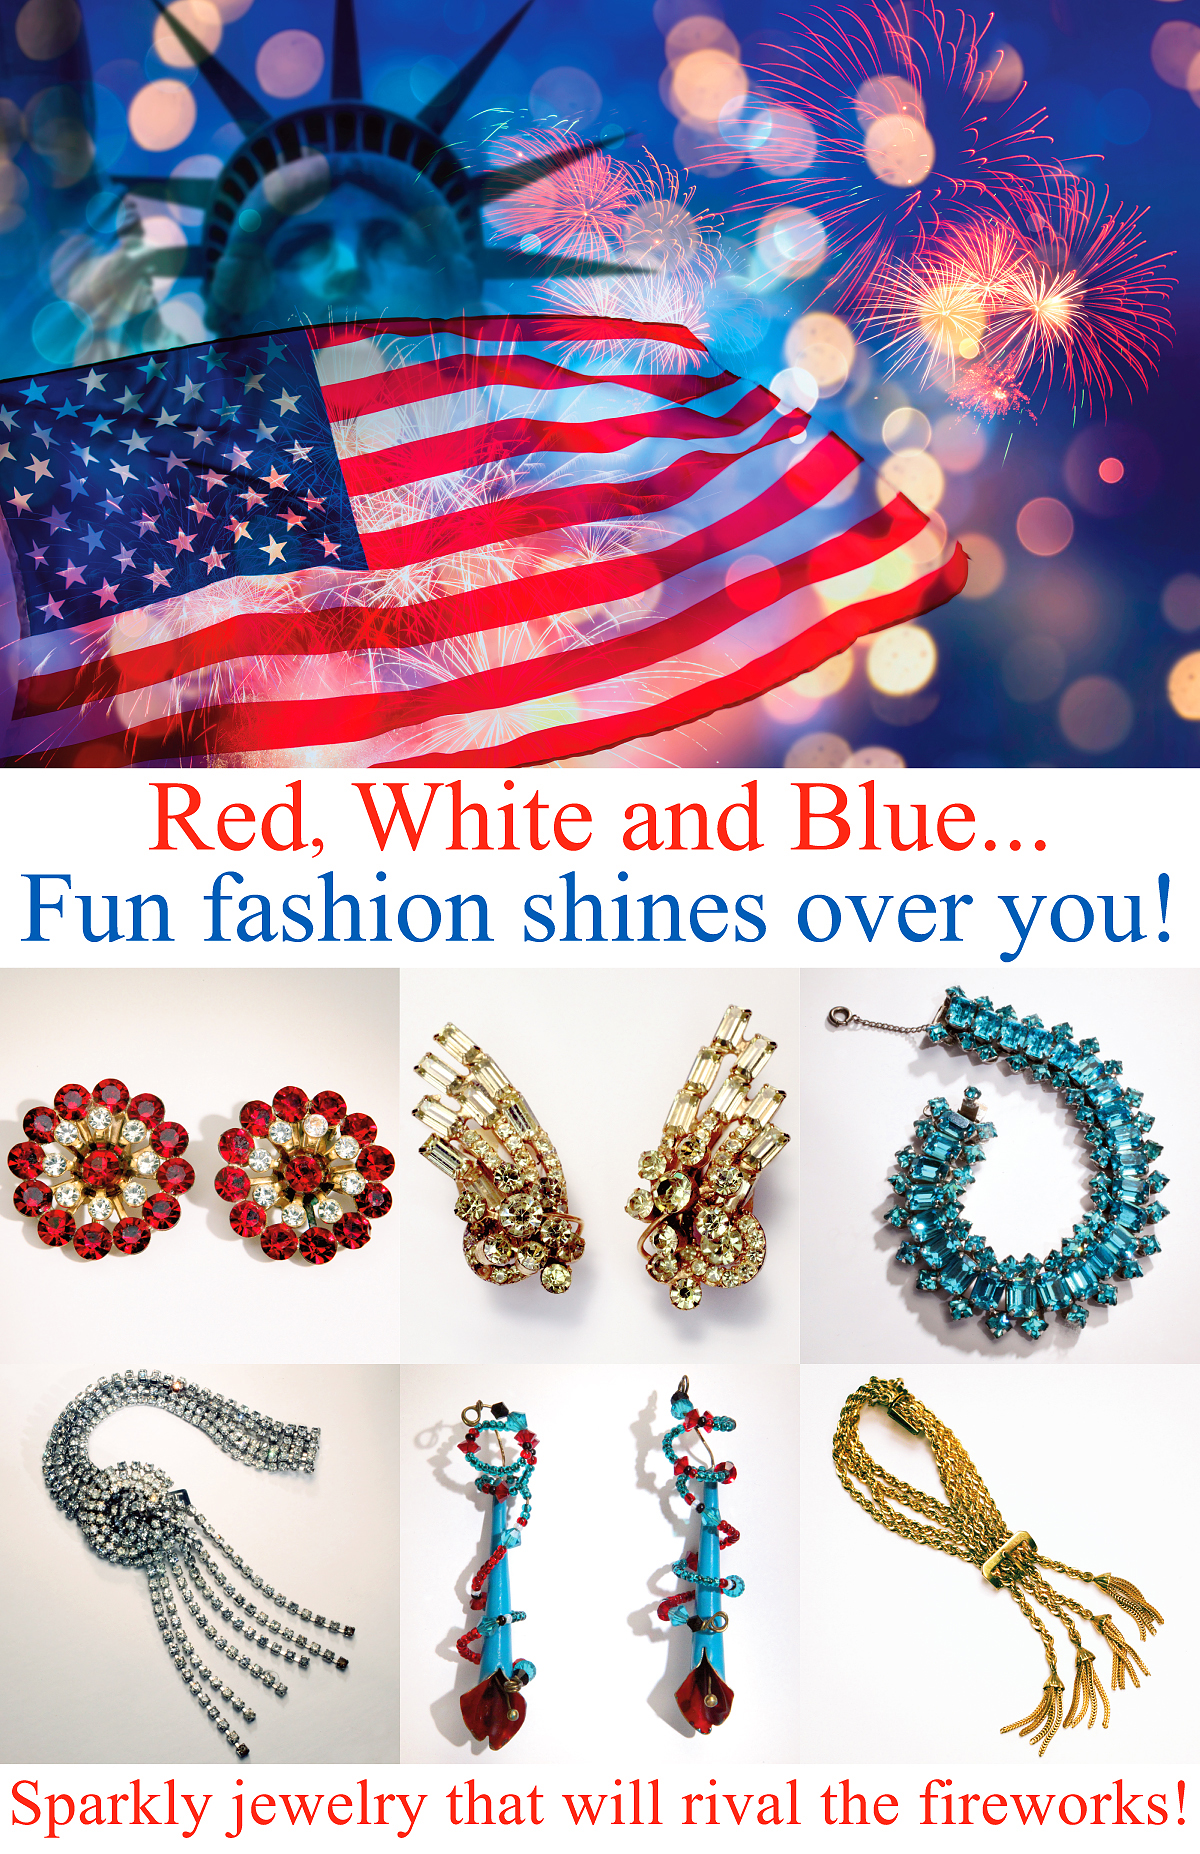 Red, White and Blue... Fun fashion shines over you!